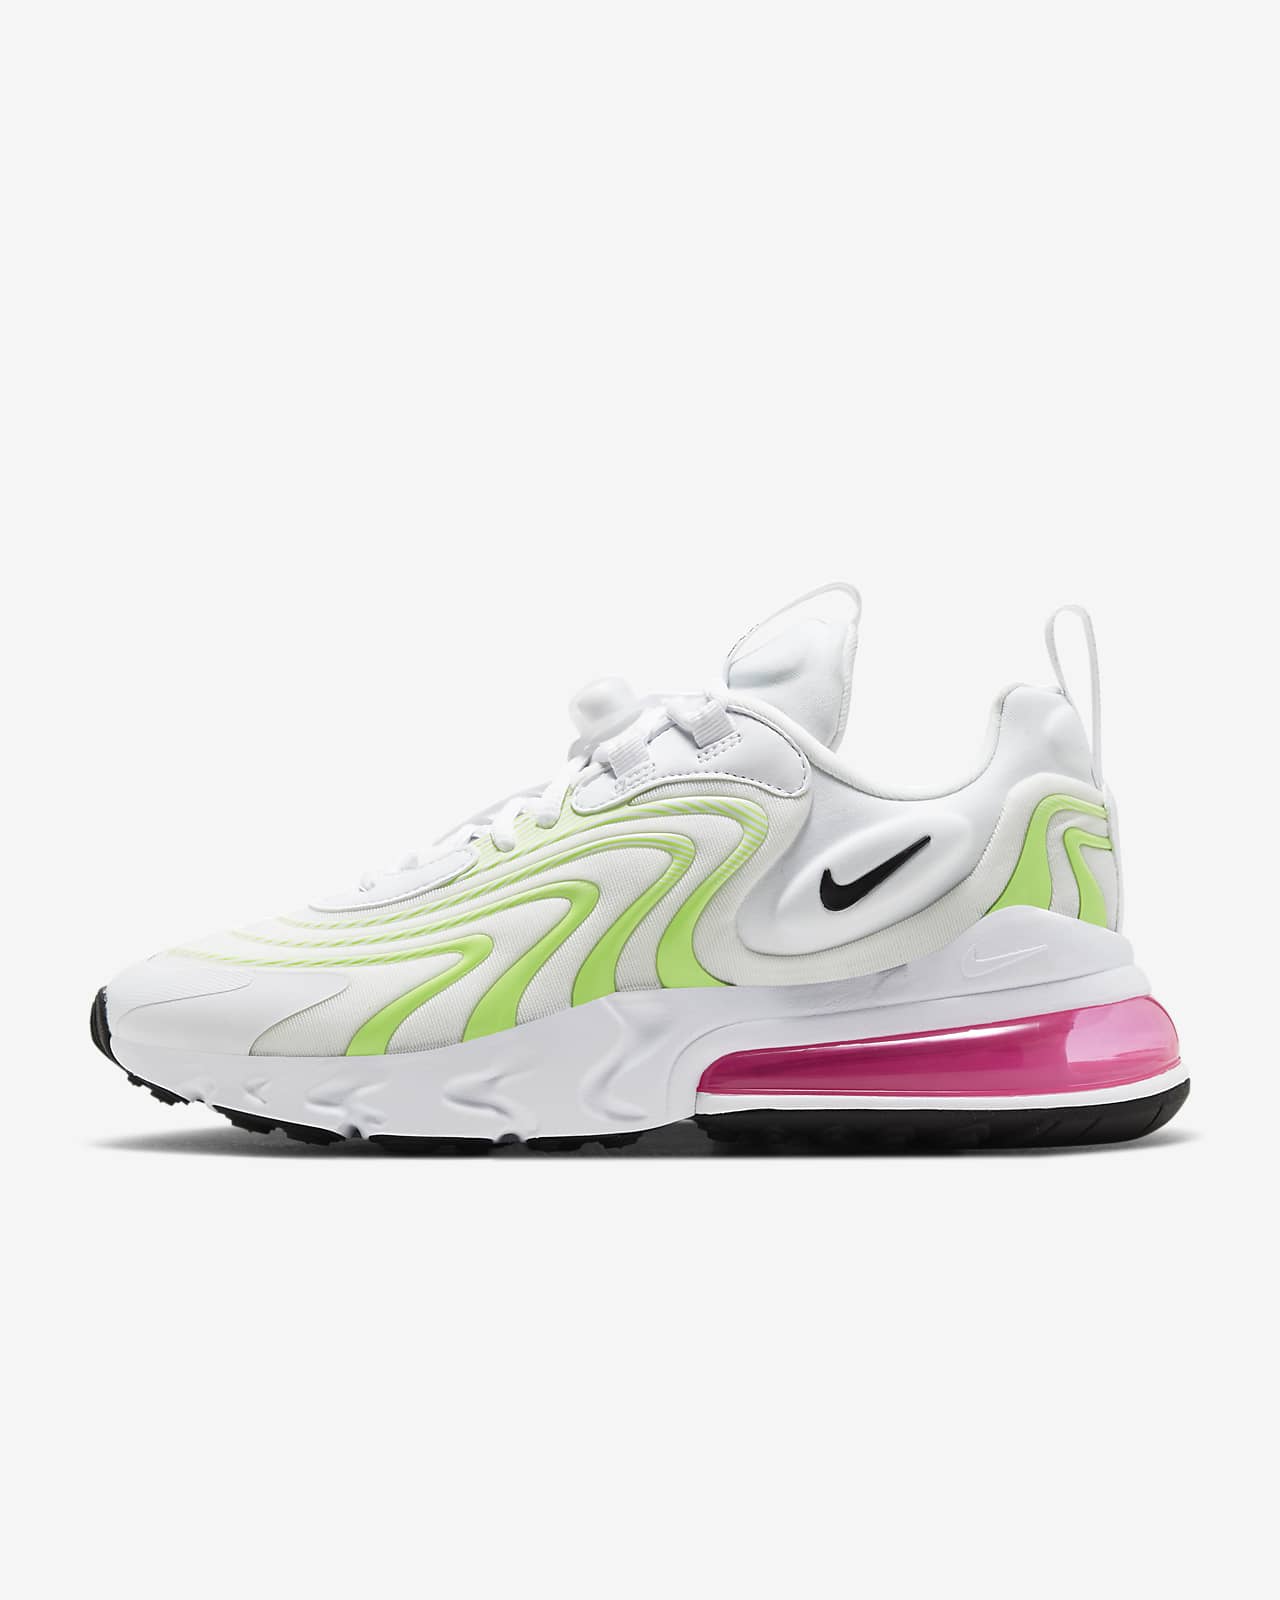 nike 270 mujer colores